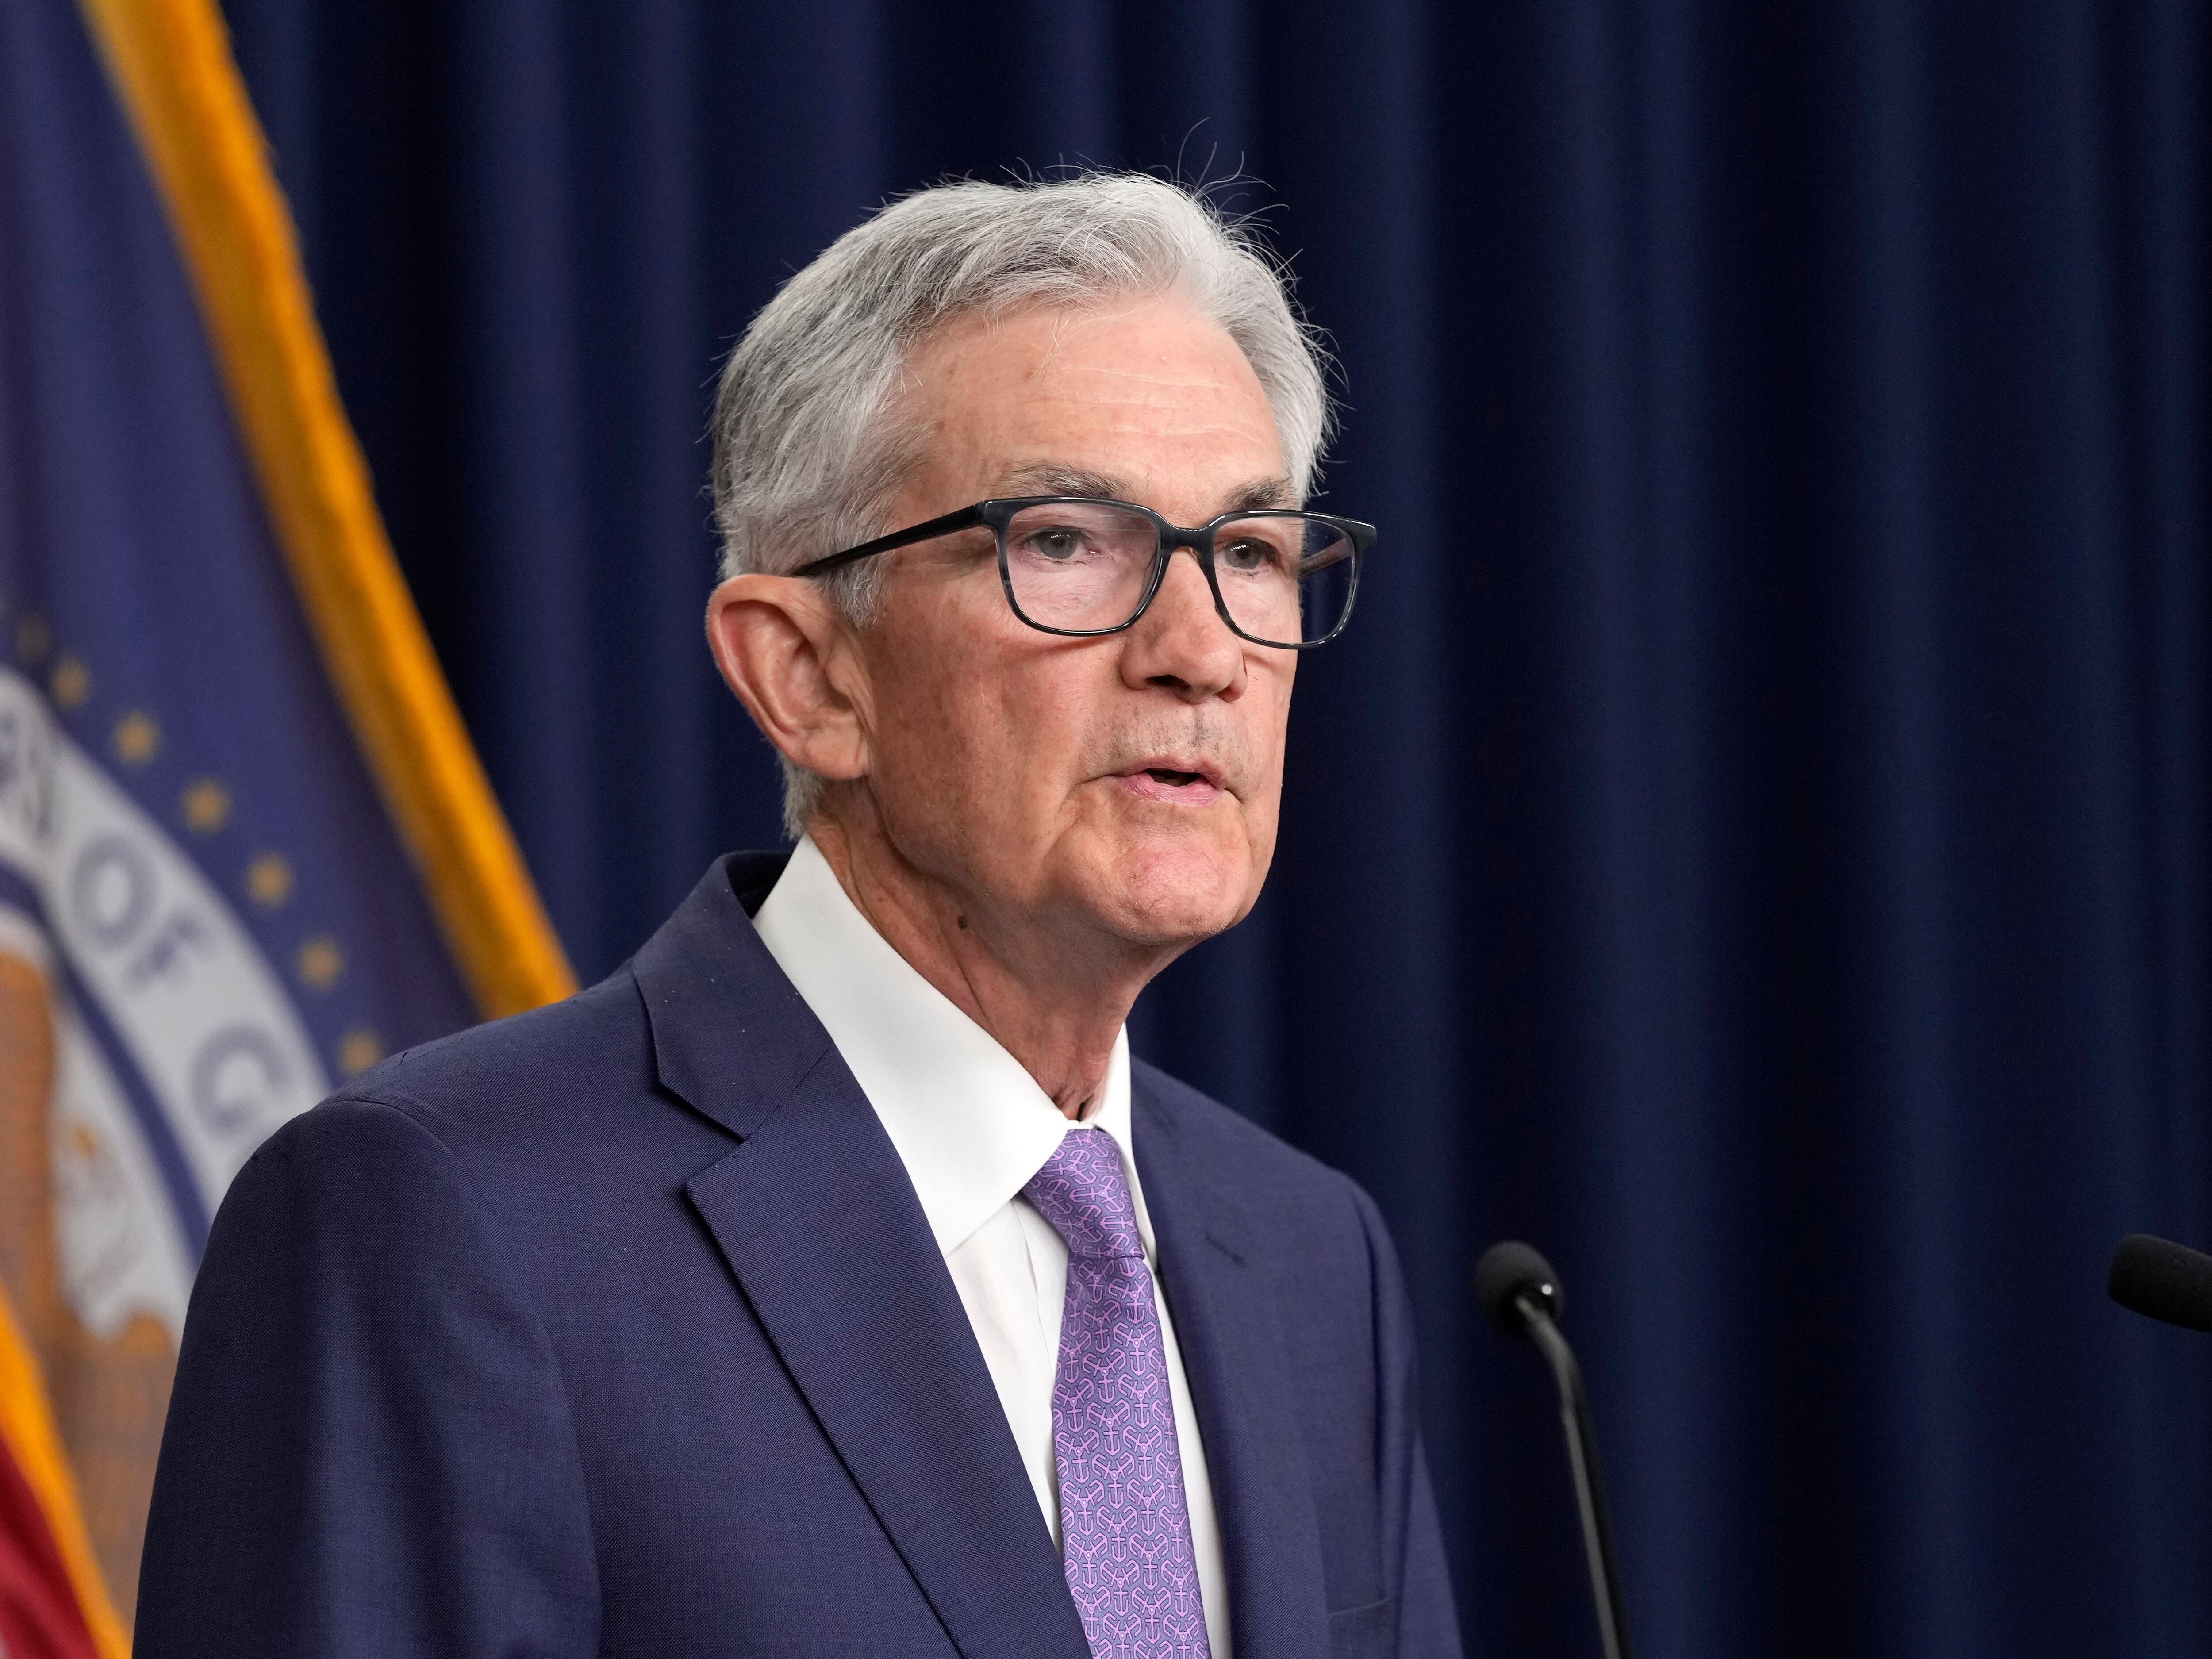 Powell says US job market is cooling, a possible signal for interest rate cut